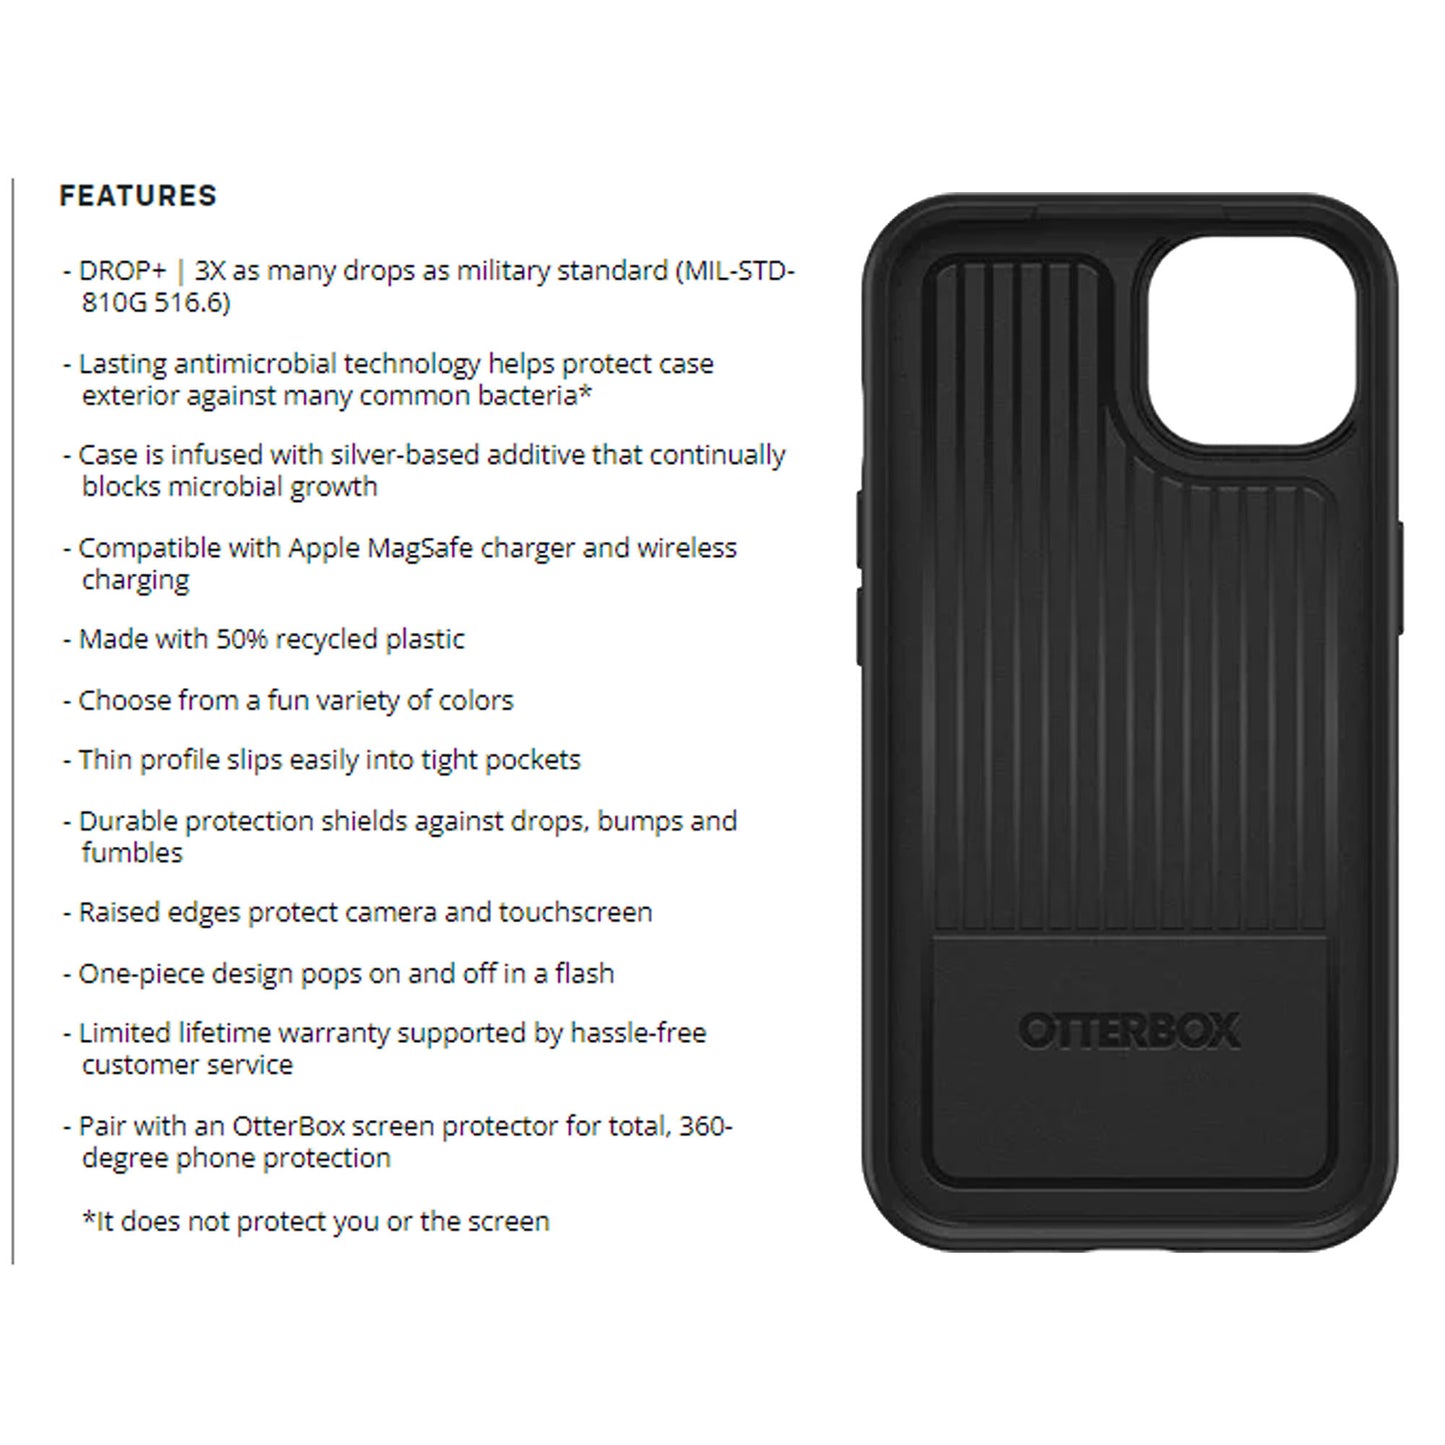 Otterbox Symmetry for iPhone 13 Pro Max 6.7" 5G - Antimicrobial Case - Black (Barcode: 840104265161 )